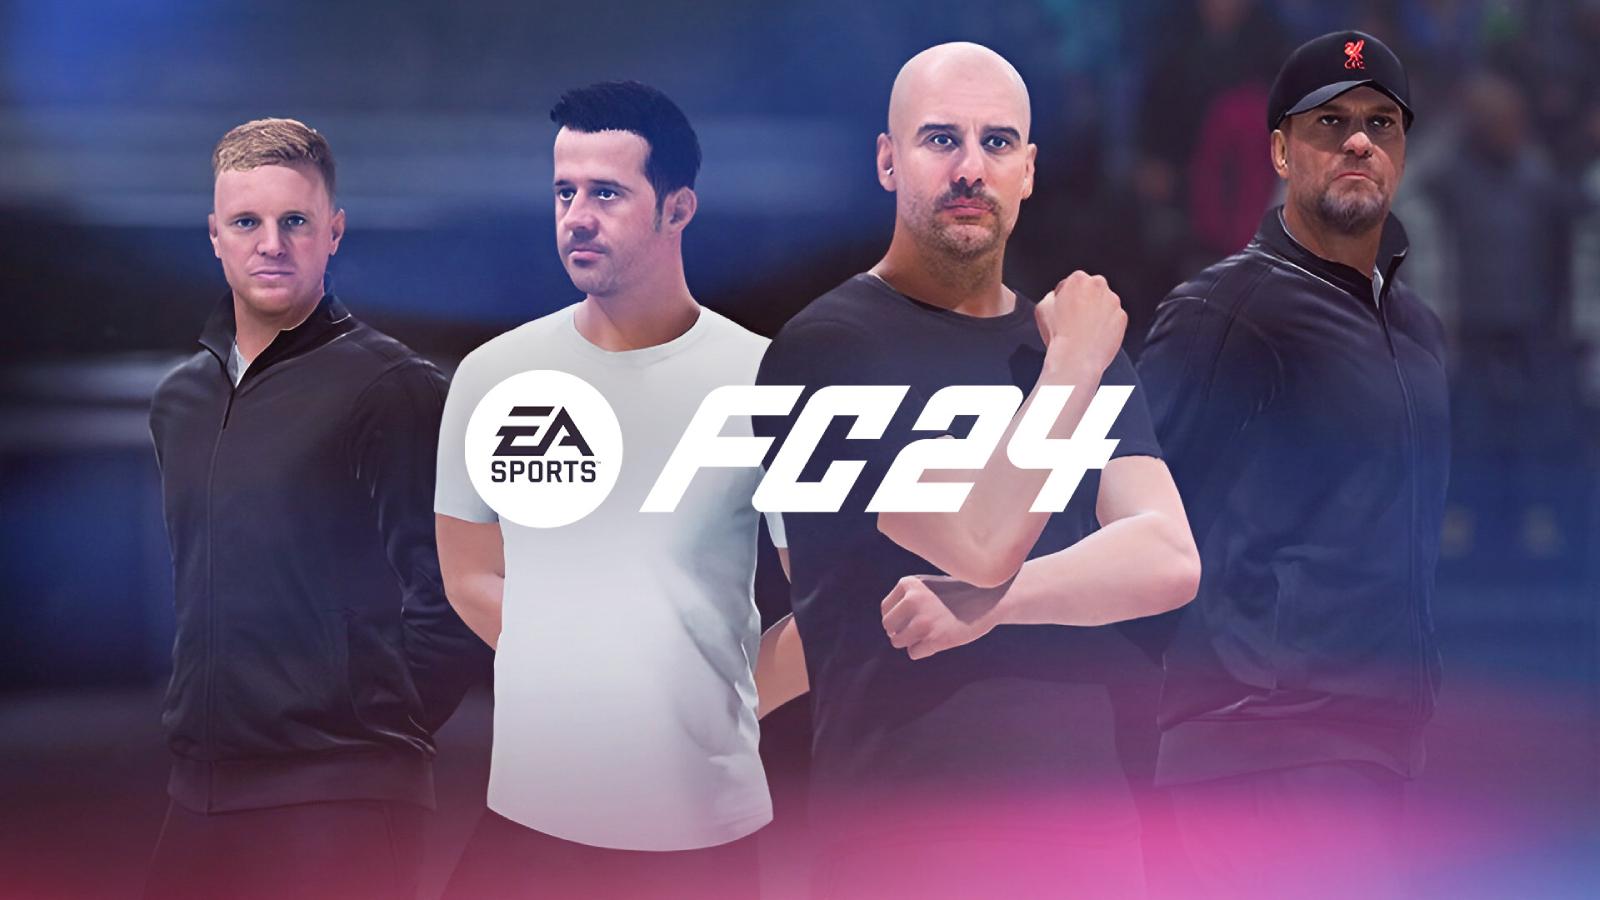 EA Sports FC 24 soundtrack: Songs, artists & music in new football game